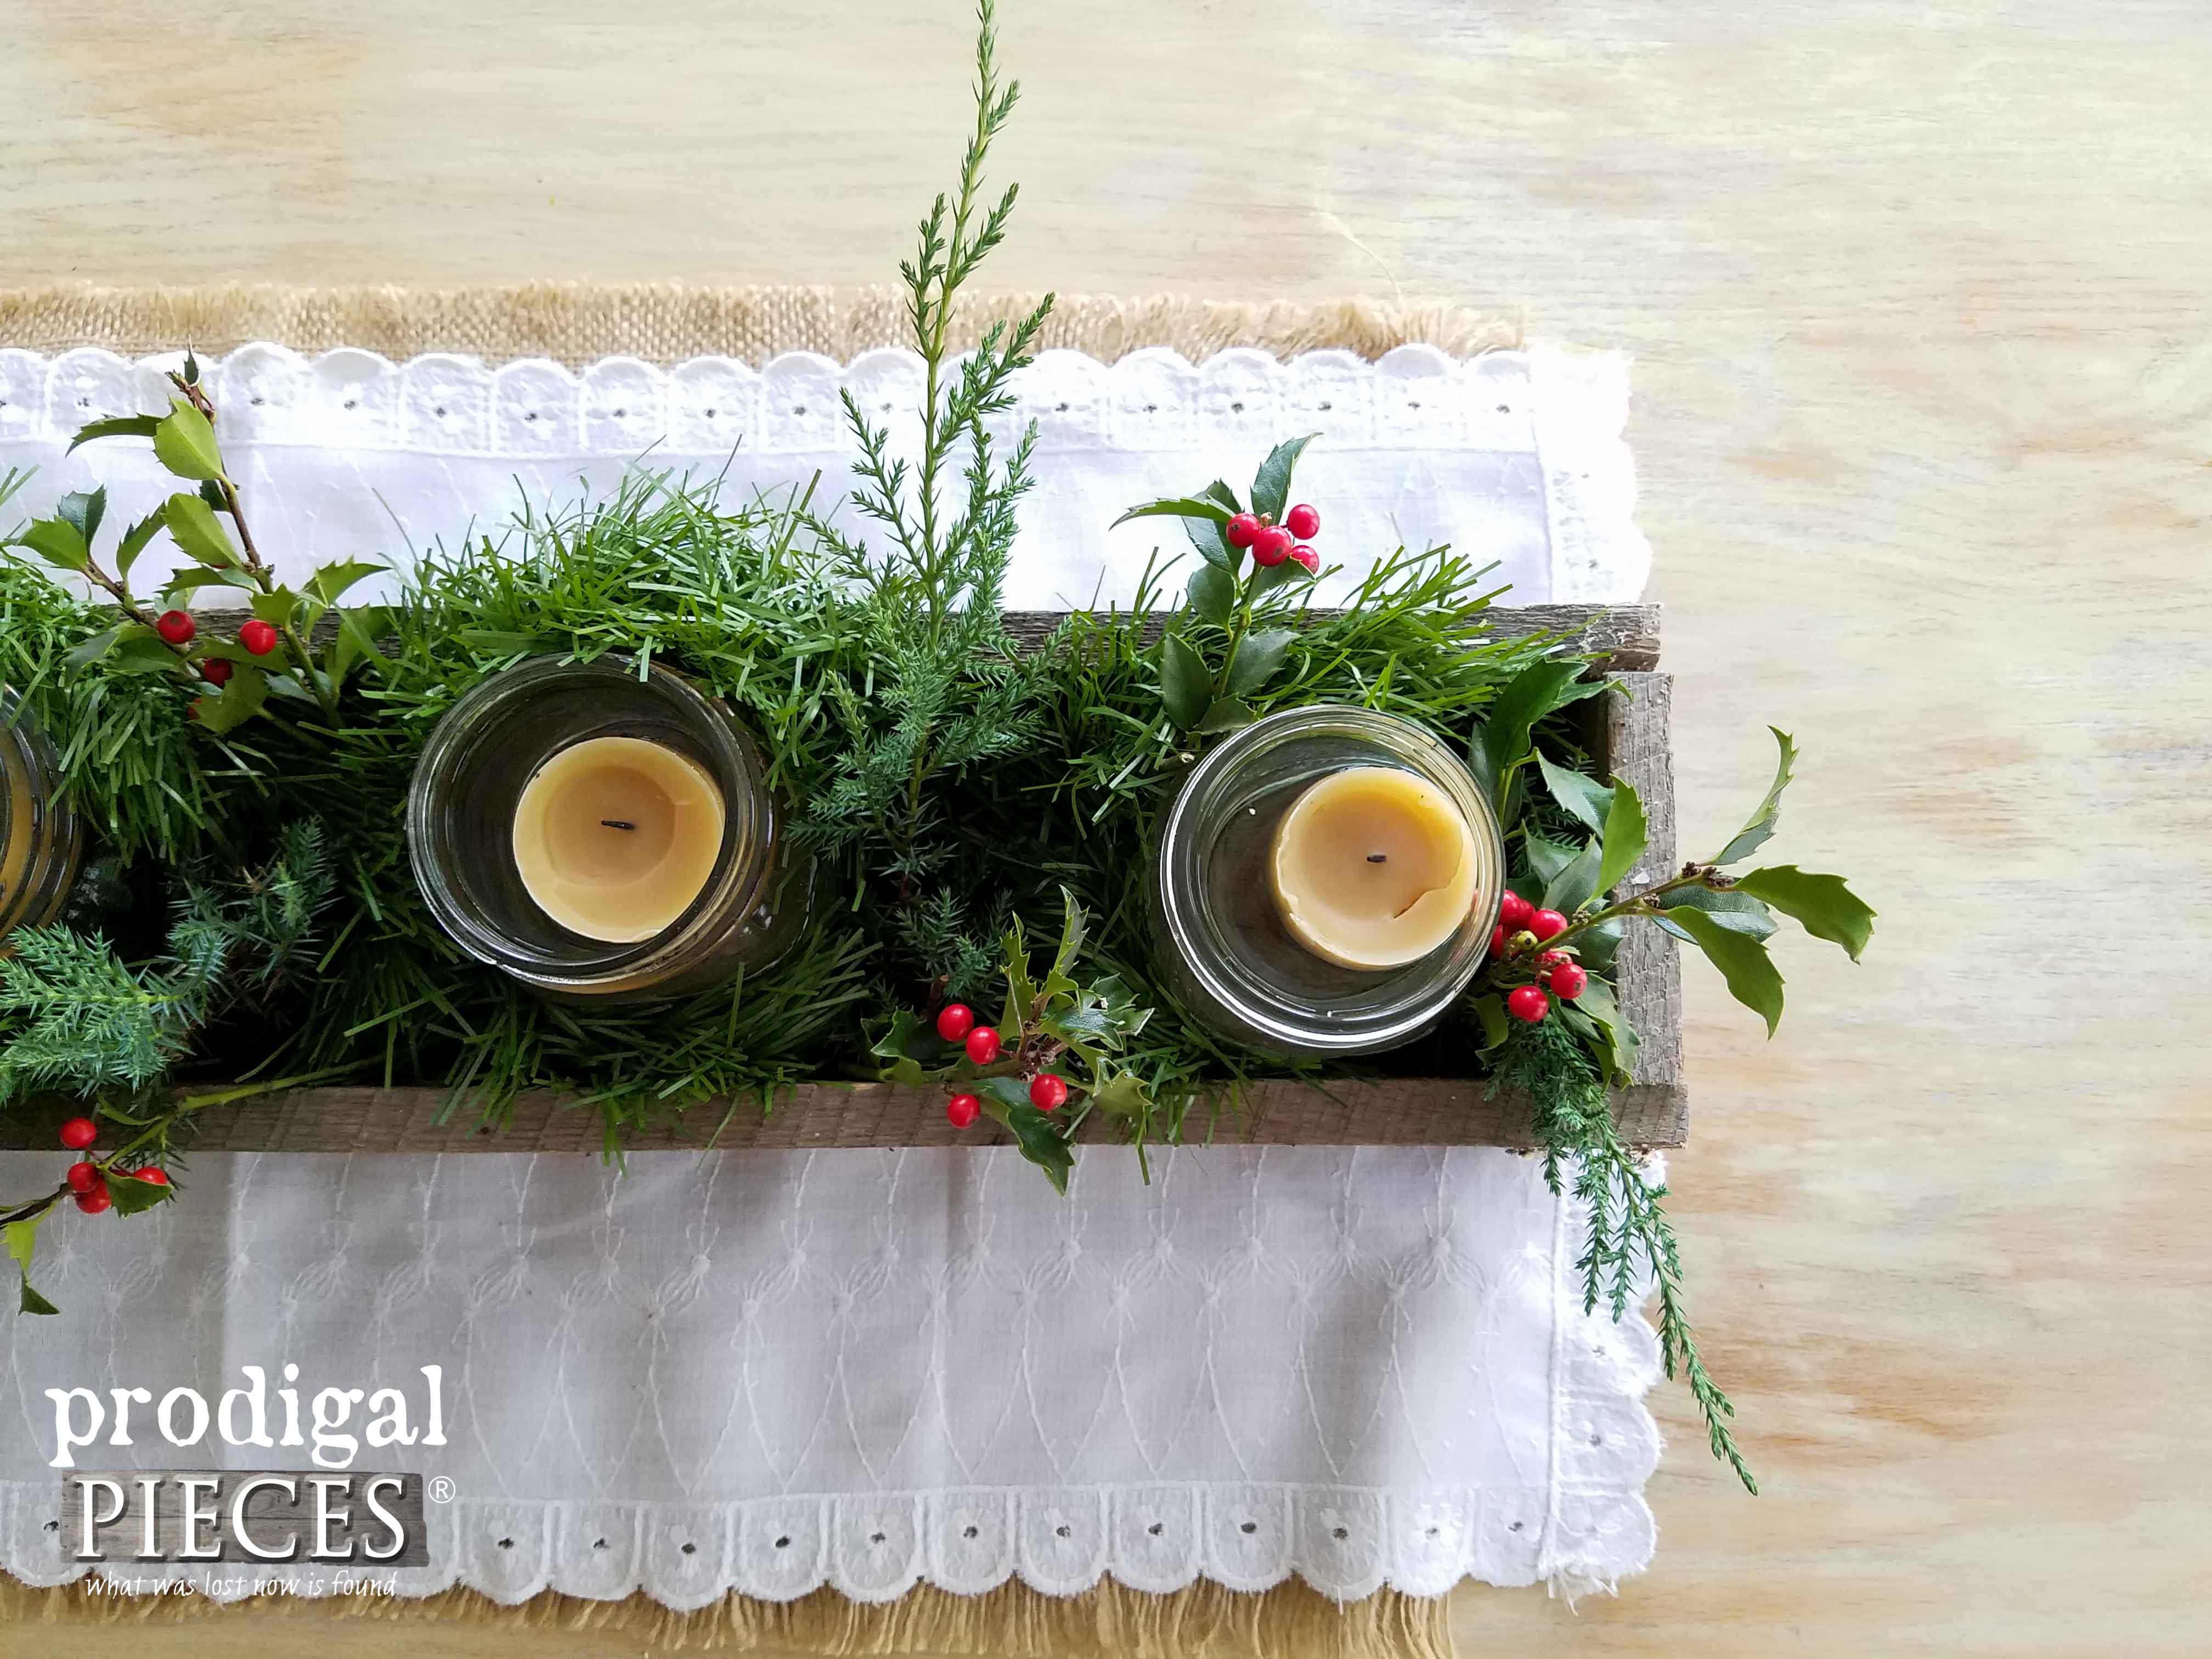 Simple Christmas Centerpiece with Pine and Holly, and Beeswax Candles in a Reclaimed Wood Trough by Prodigal Pieces | www.prodigalpieces.com